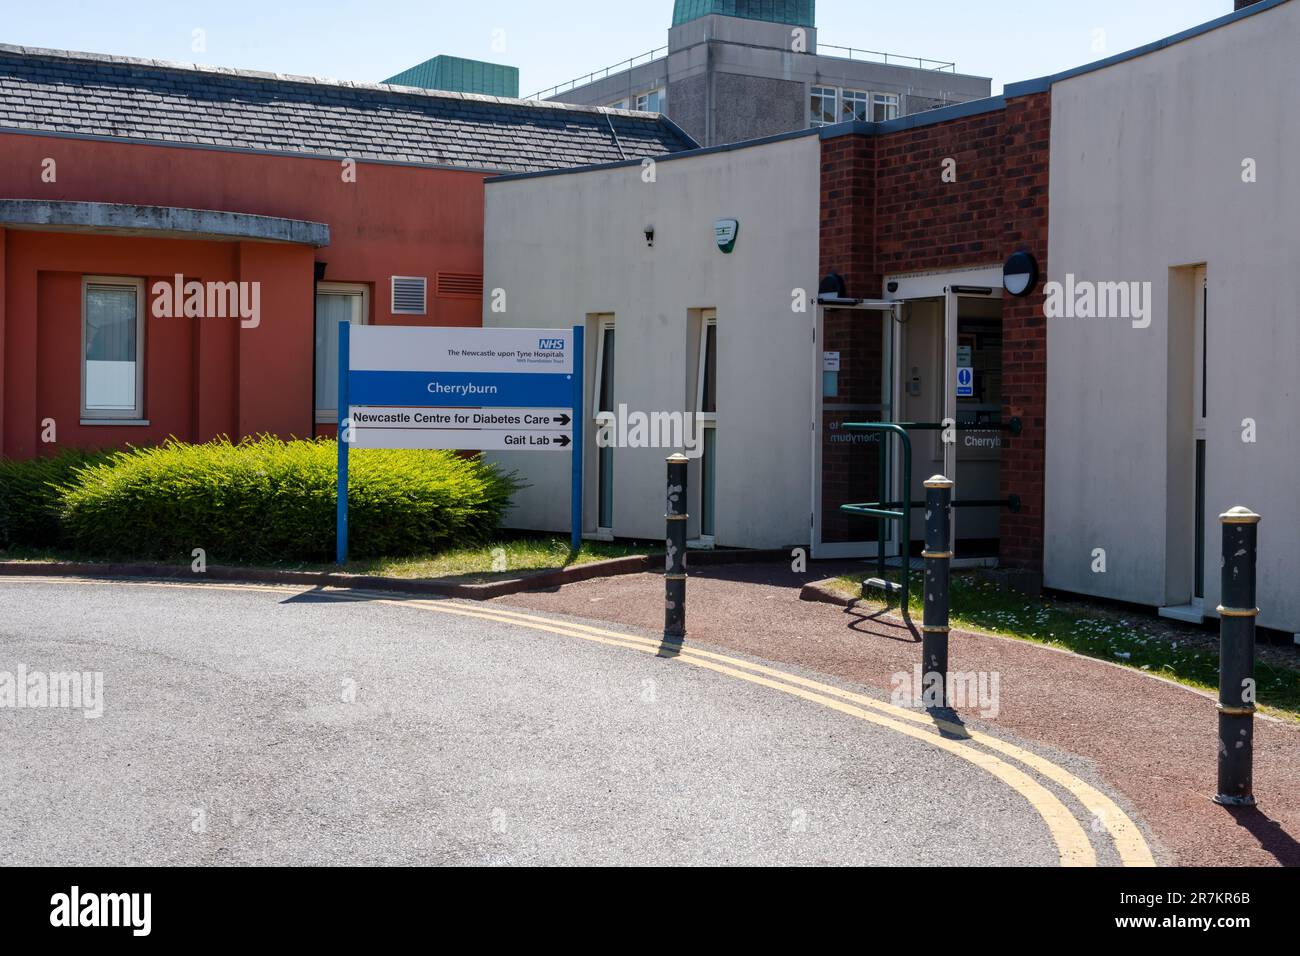 Newcastle Centre for Diabetes Care in Cherryburn im Campus for Ageing and Vitality Westgate Road (ehemaliges General Hospital) Newcastle upon Tyne UK Stockfoto